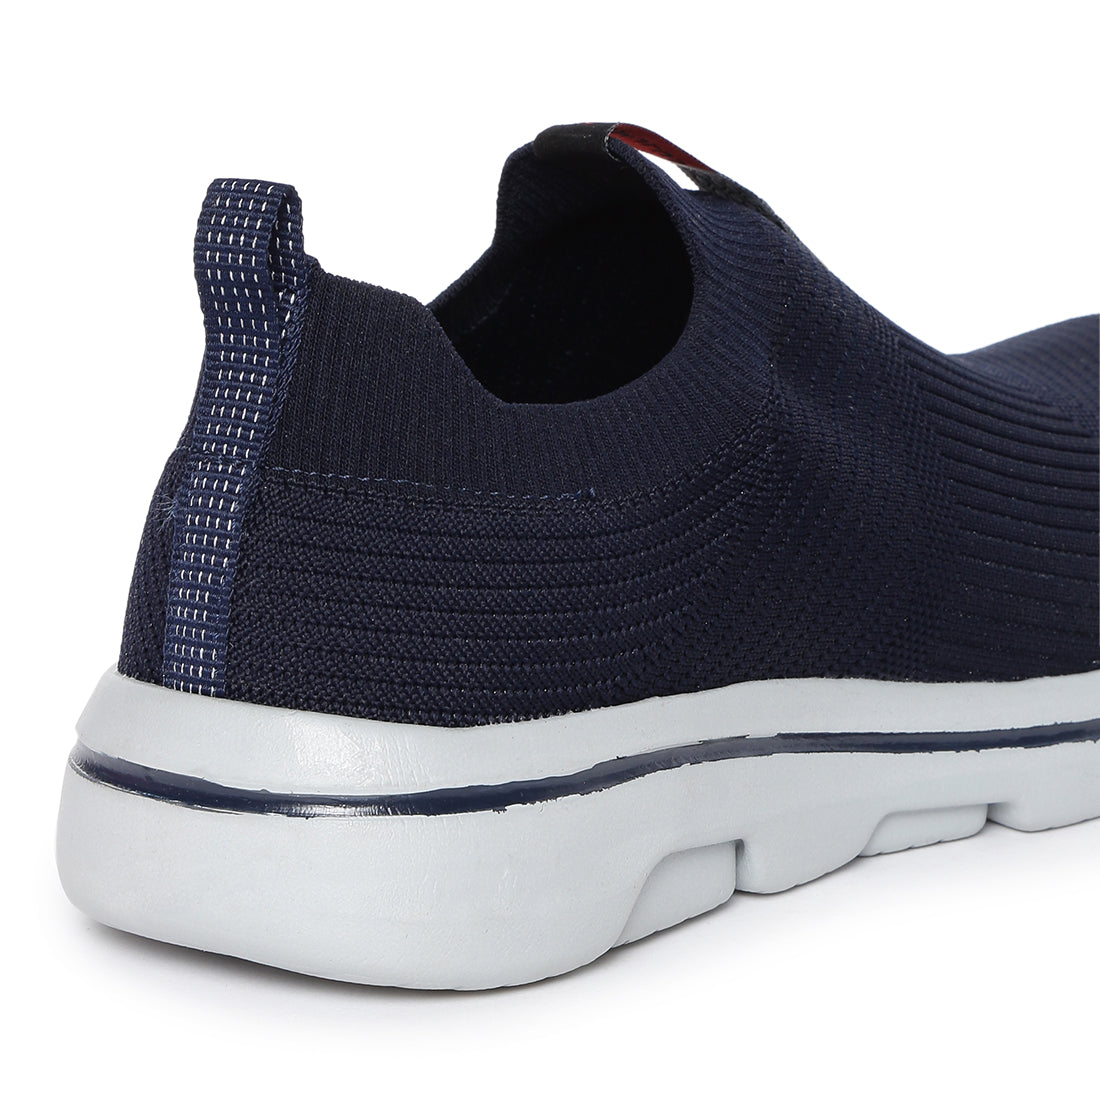 Paragon Stimulus Casual Navy Blue Knitted Training Shoes for Men